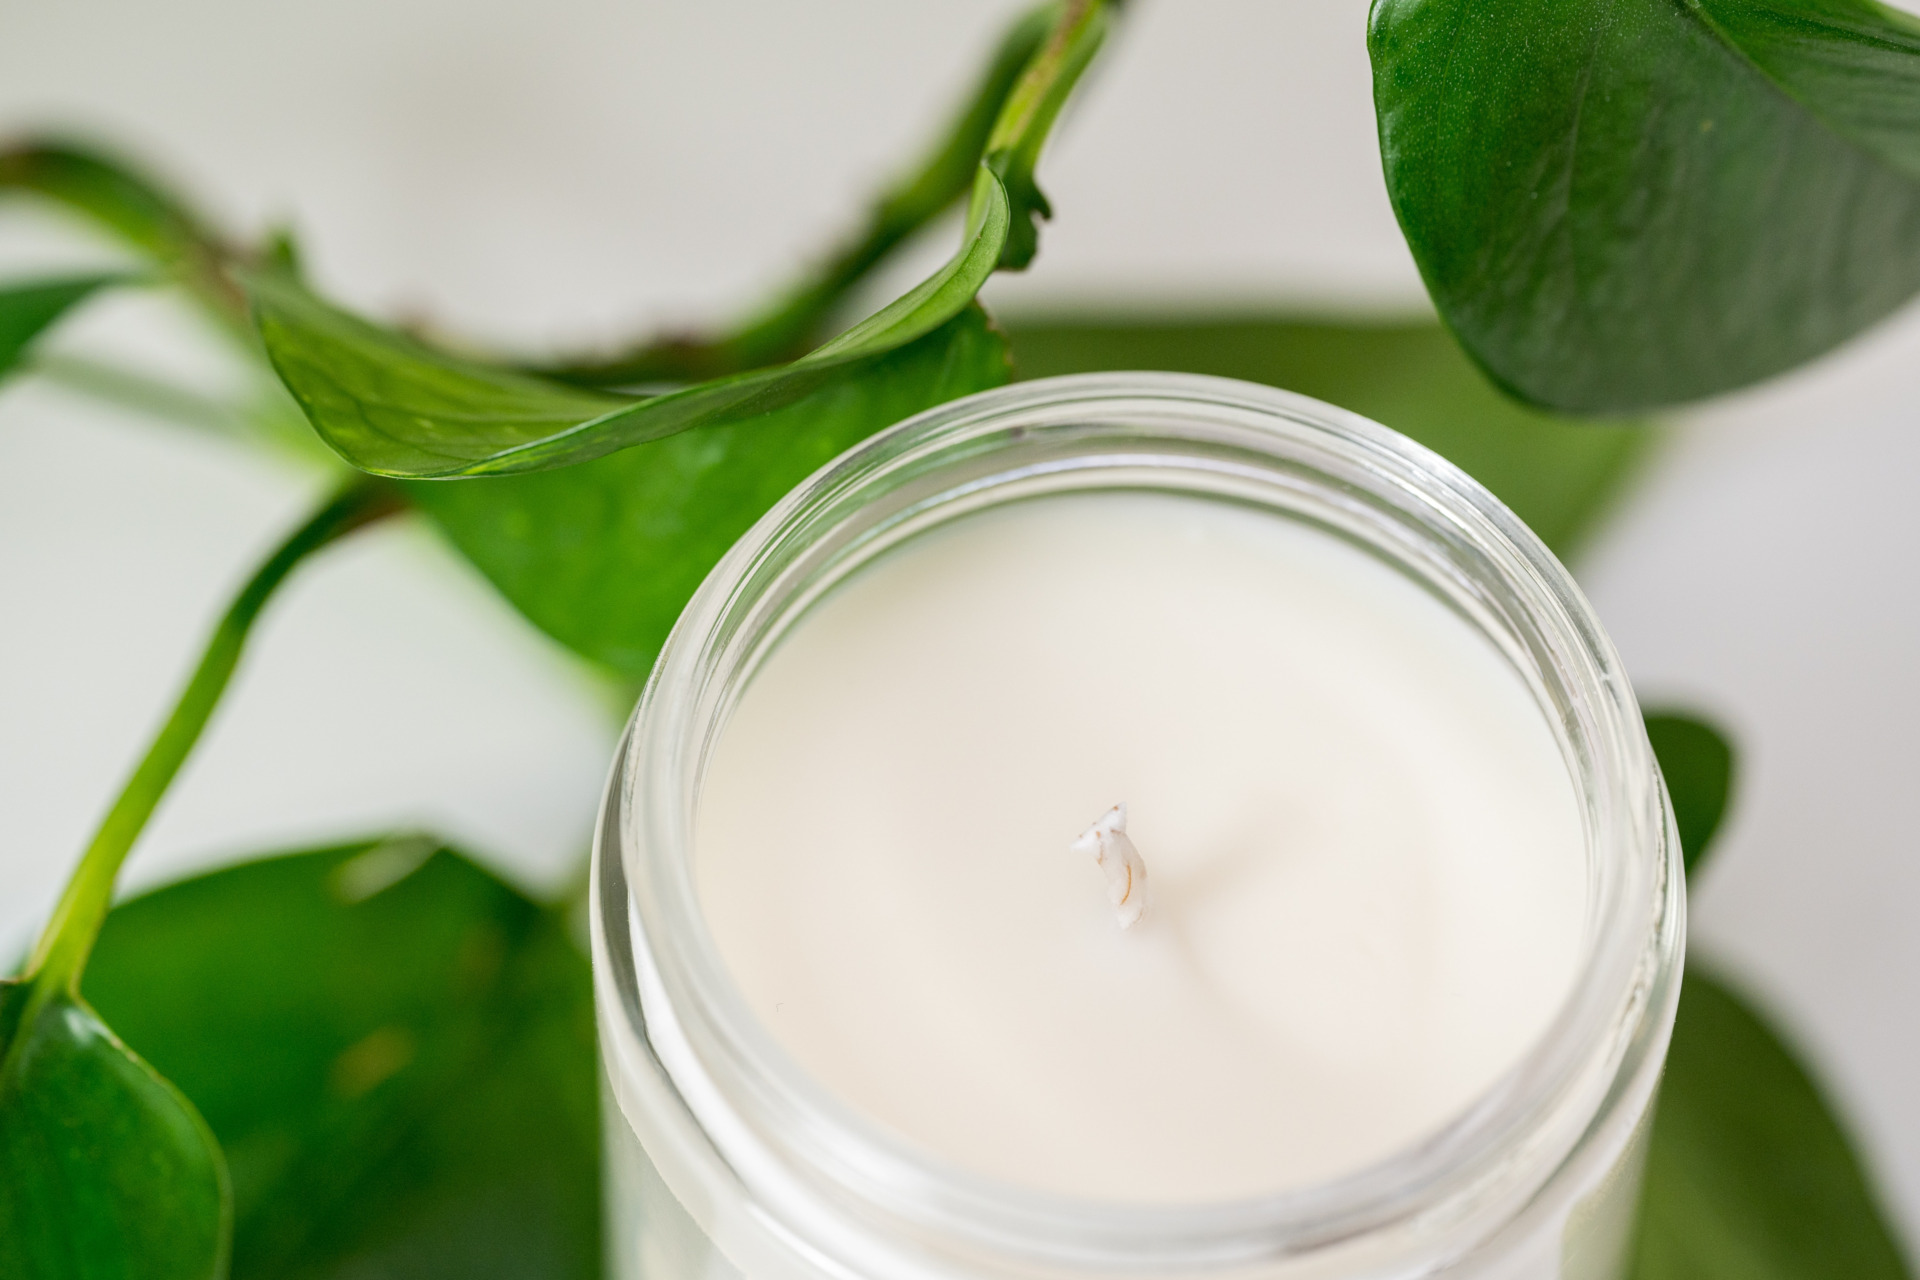 Glass jar candle next to leaves